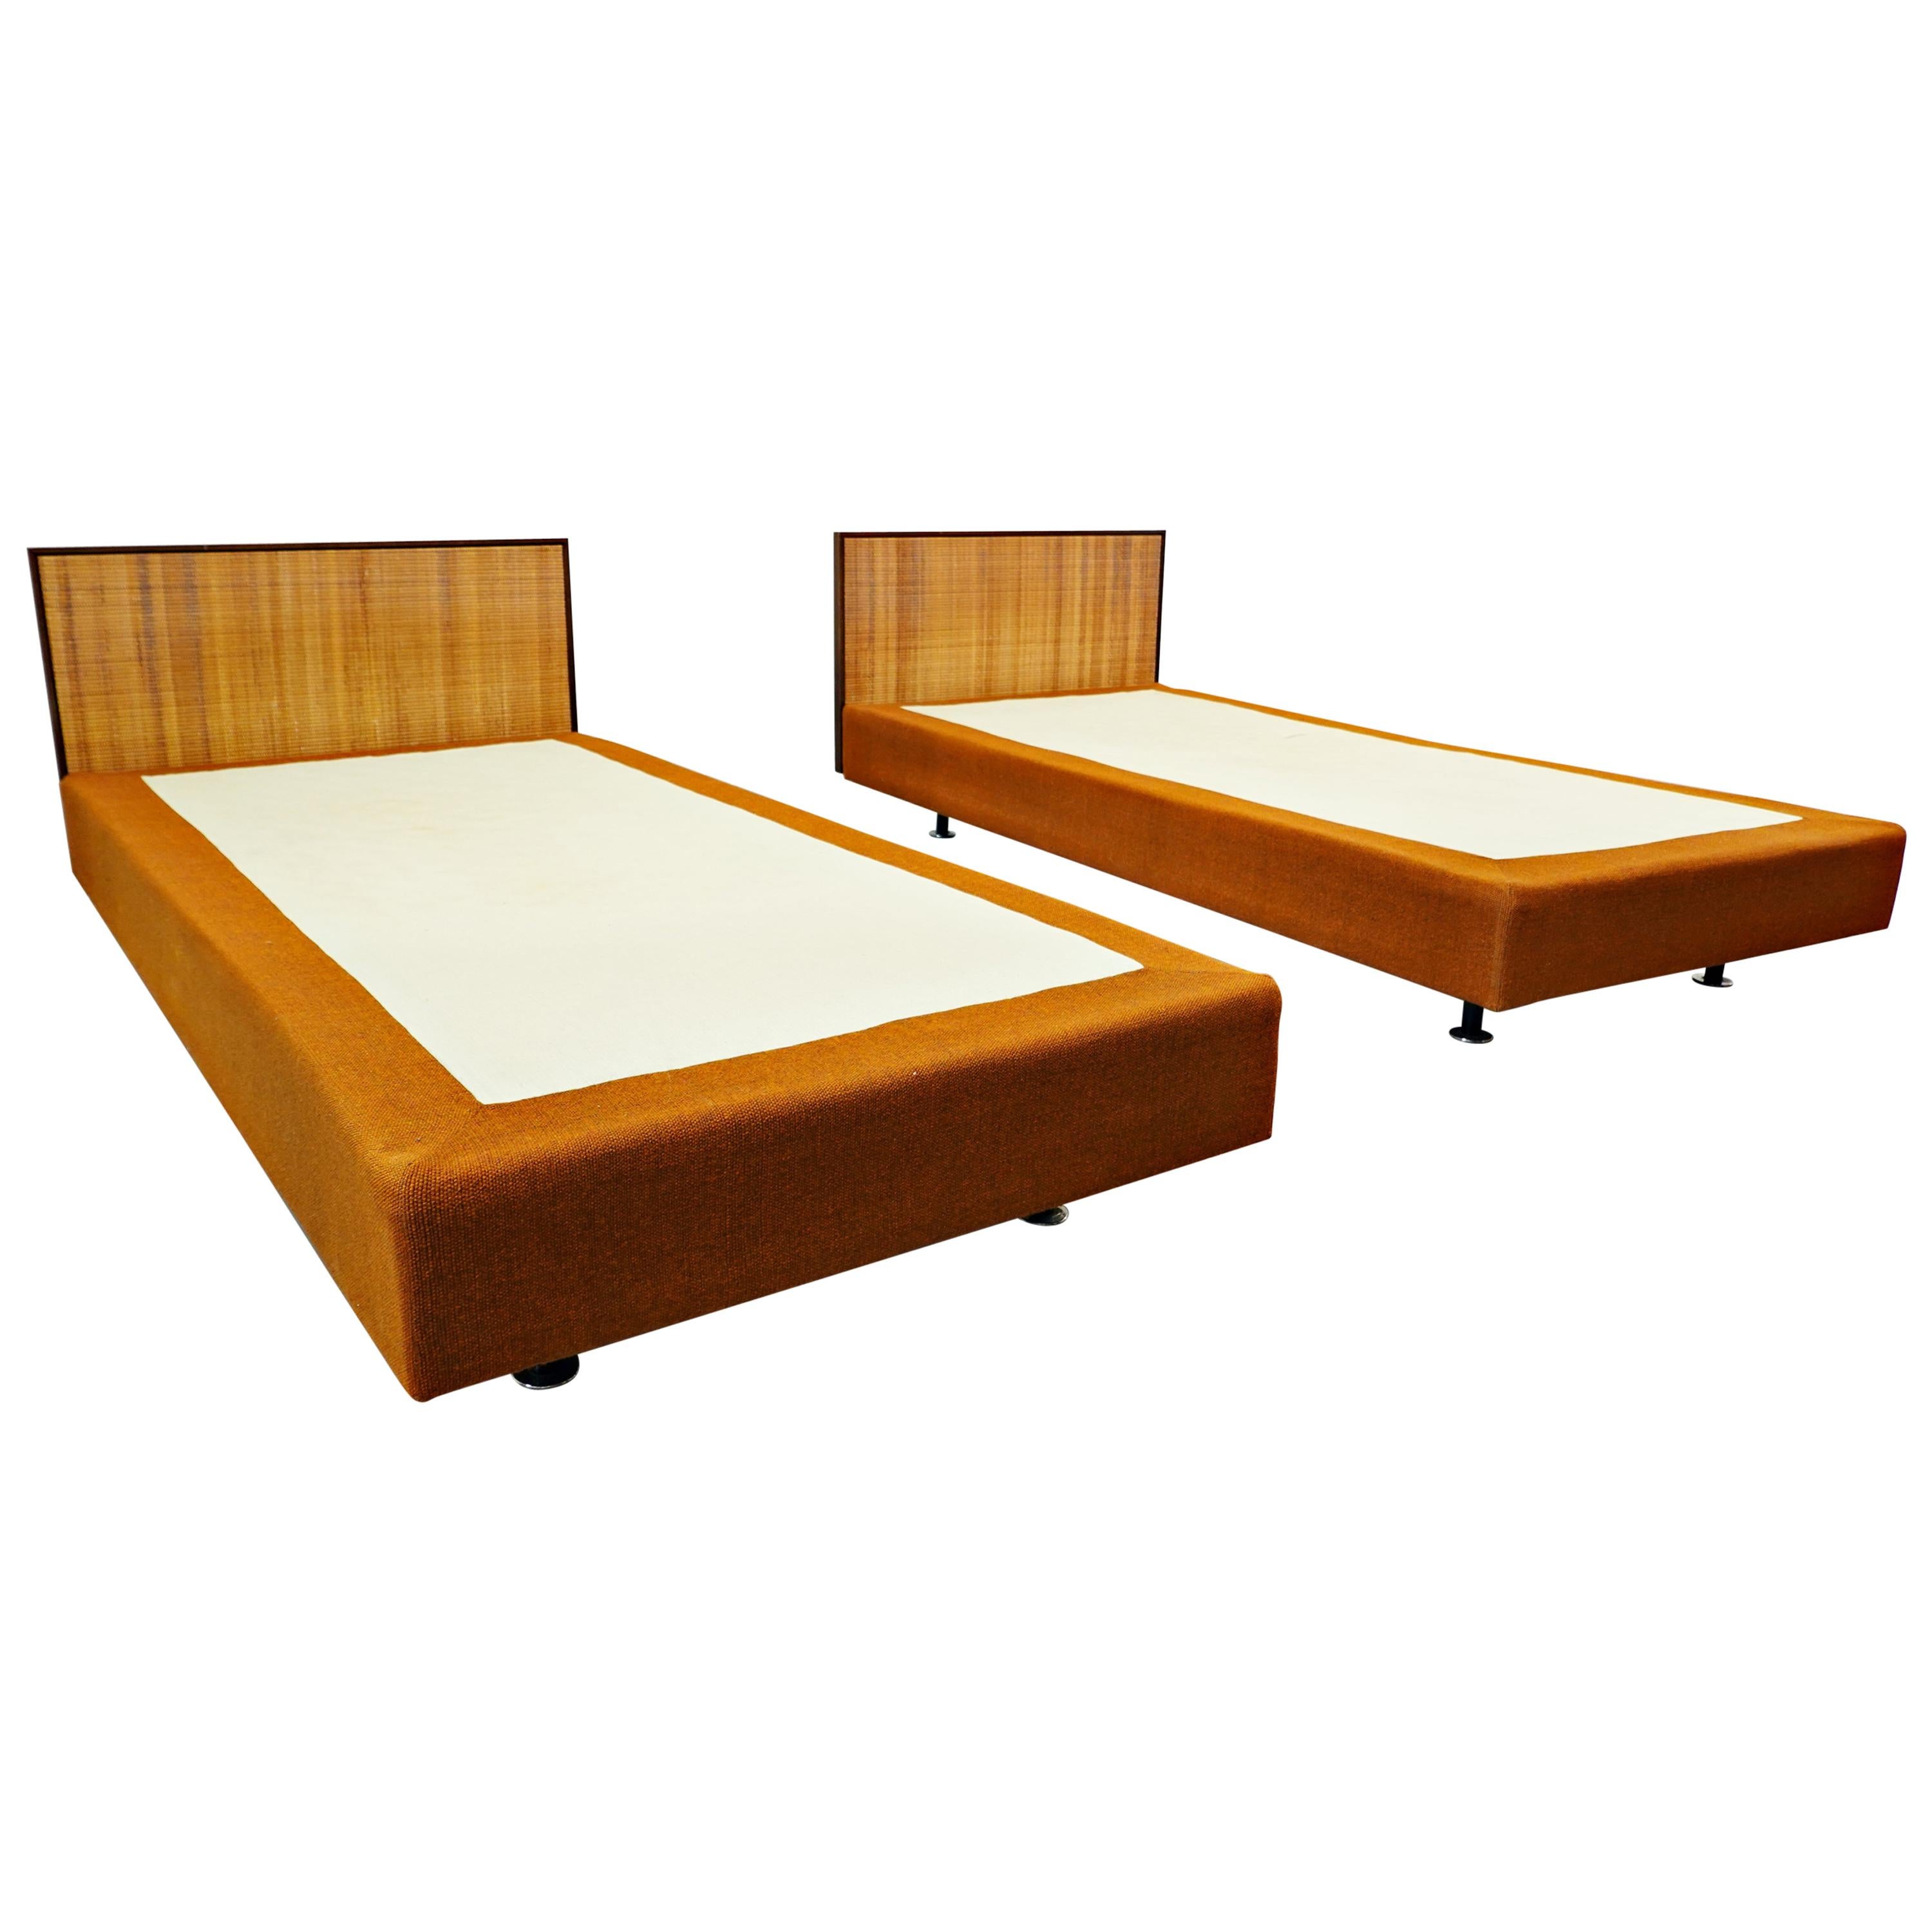 Mid-Century Modern Pair of Beds, Knoll, 1950s